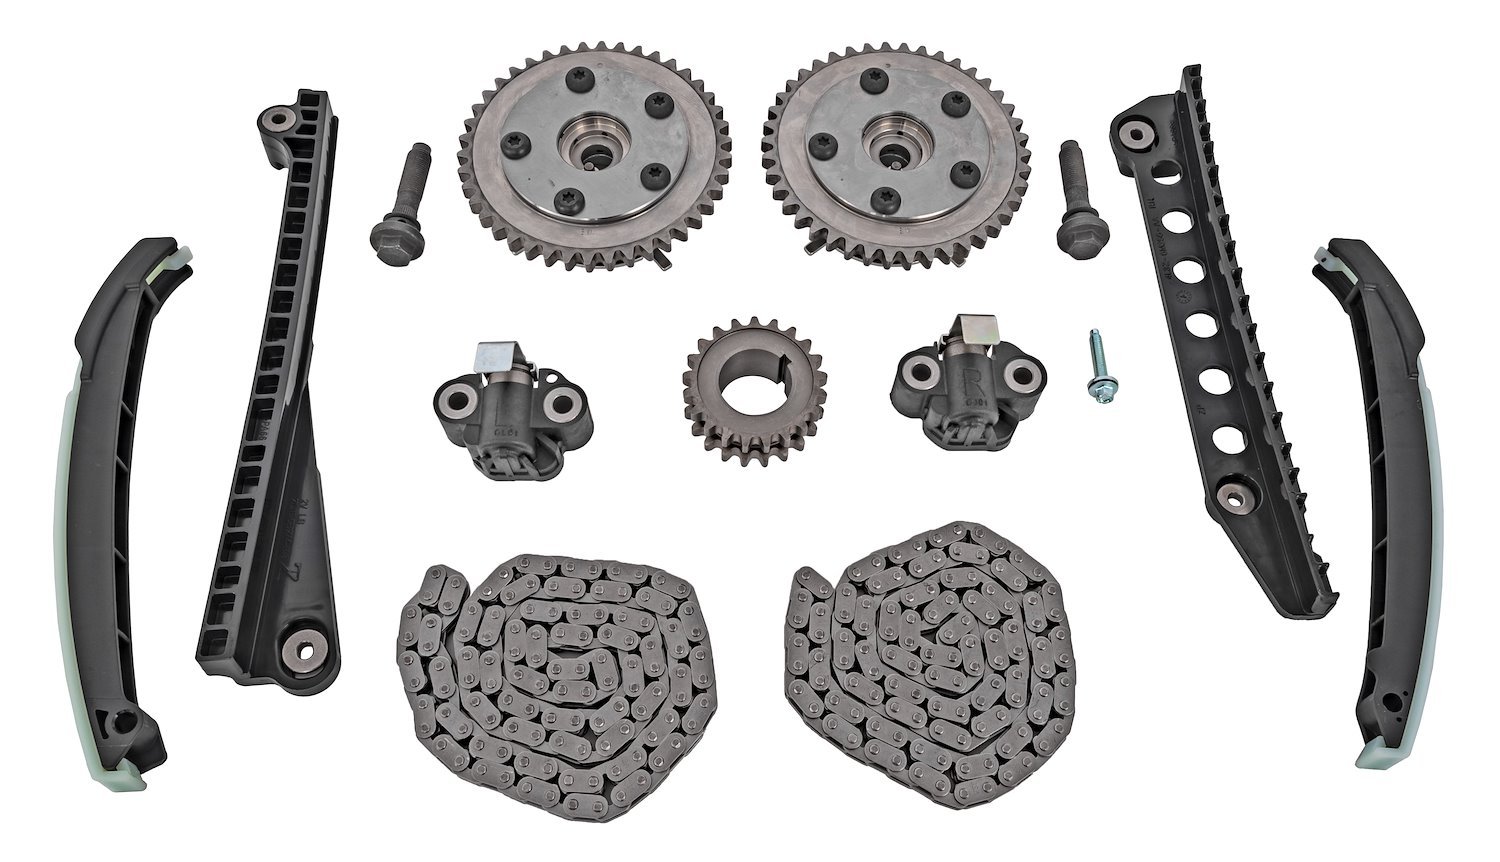 Timing Chain Kit for 2004-2010 Ford, Lincoln Trucks & SUVs w/5.4L V8 Engine